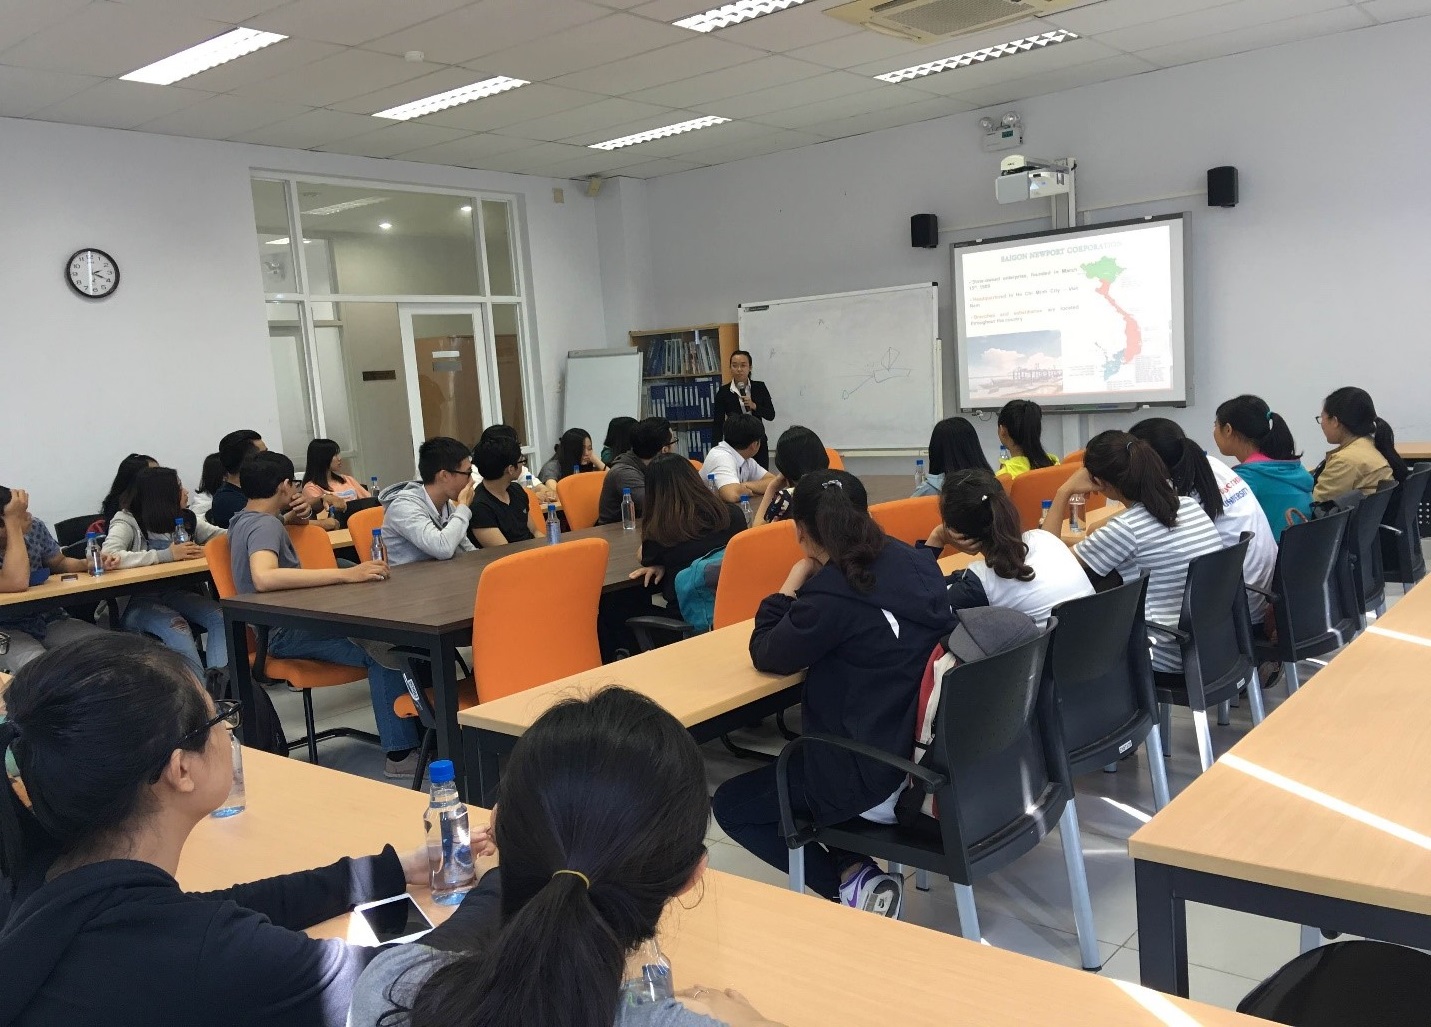 The students listening the introduction of practical operations at Tan Cang STC